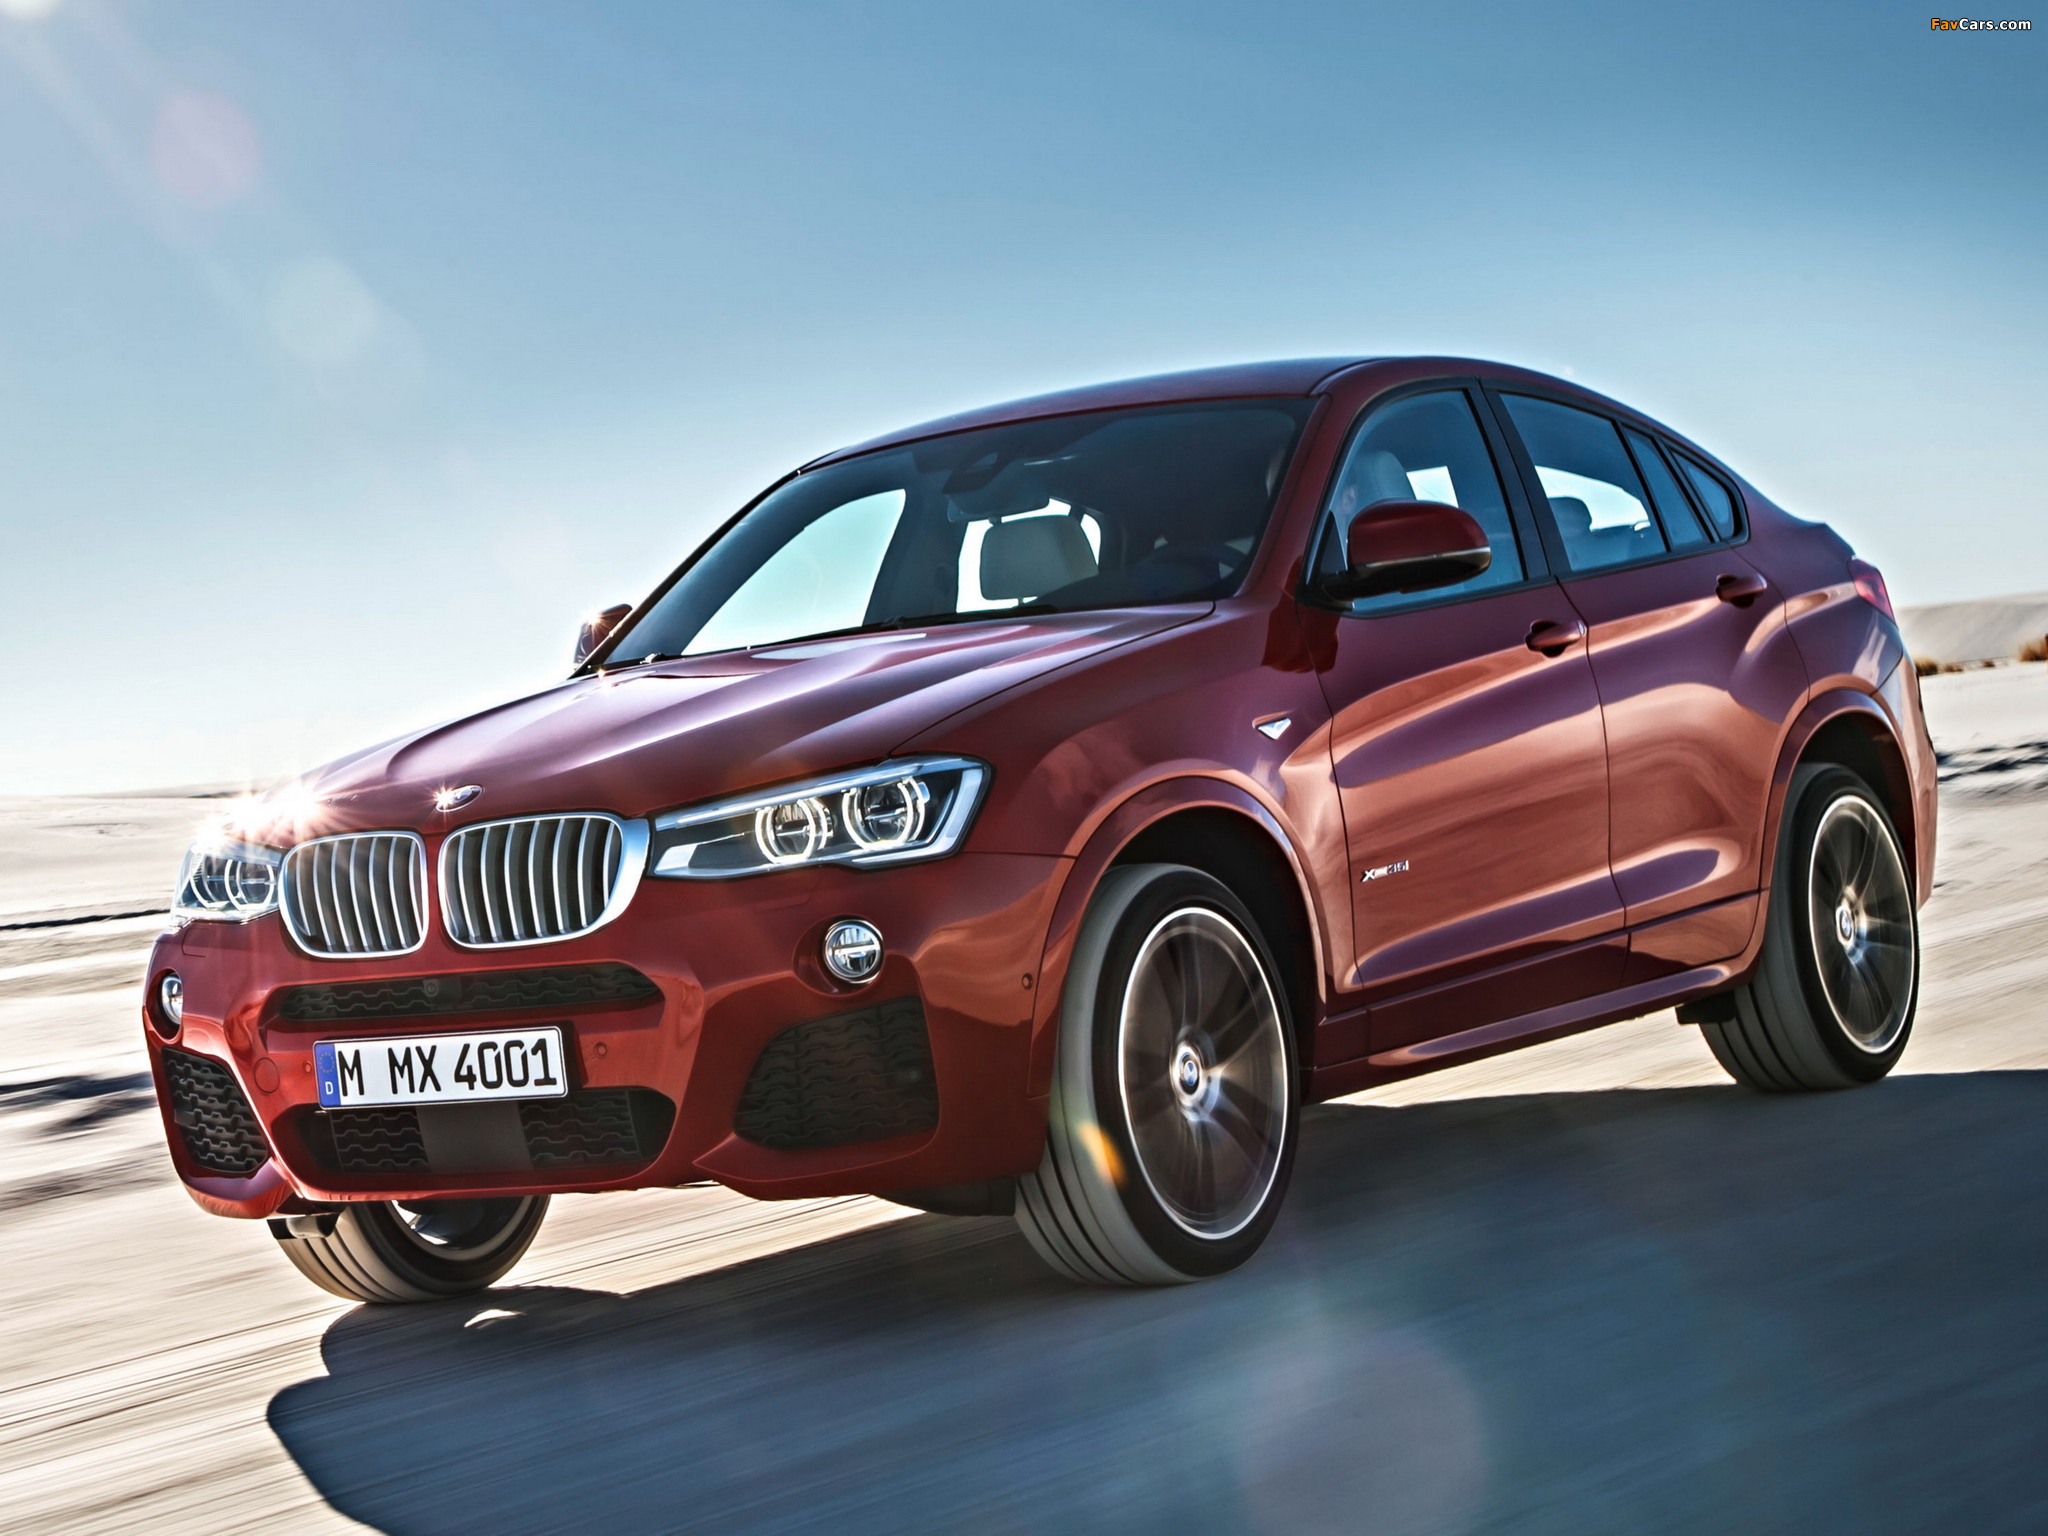 BMW X4 xDrive35i M Sports Package (F26) 2014 pictures (2048 x 1536)